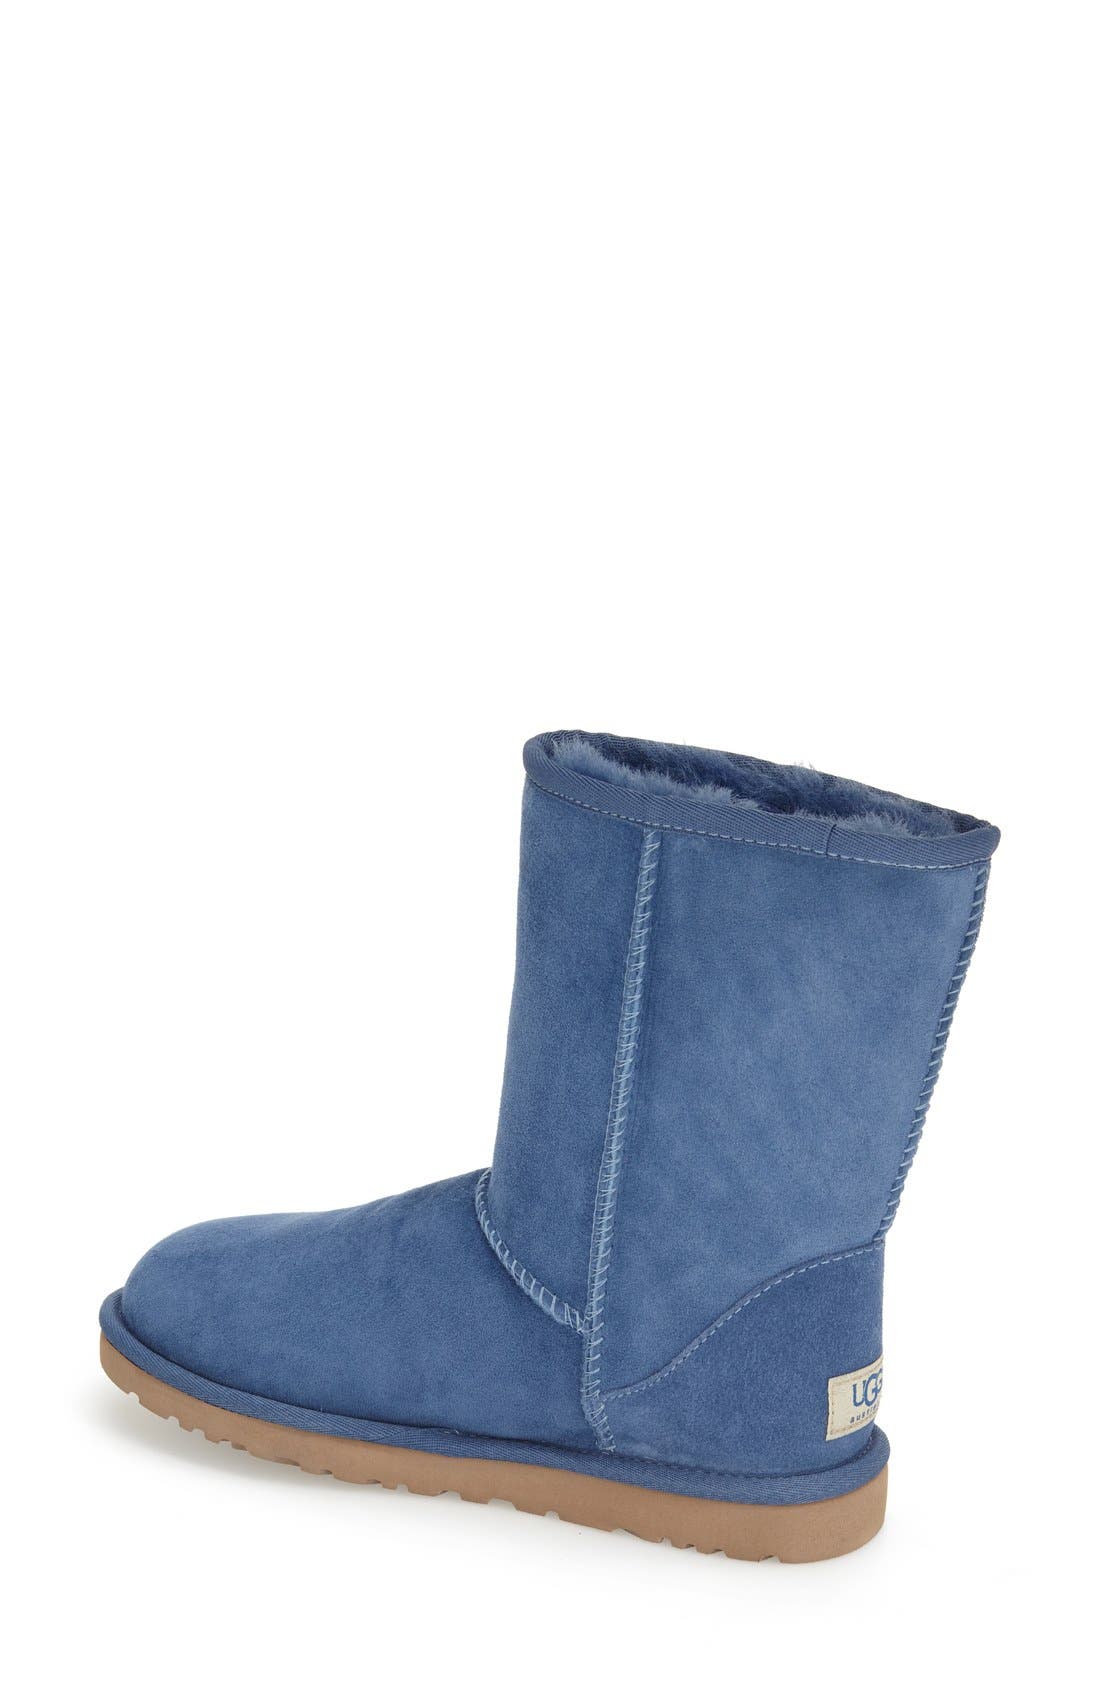 most popular ugg boots 218